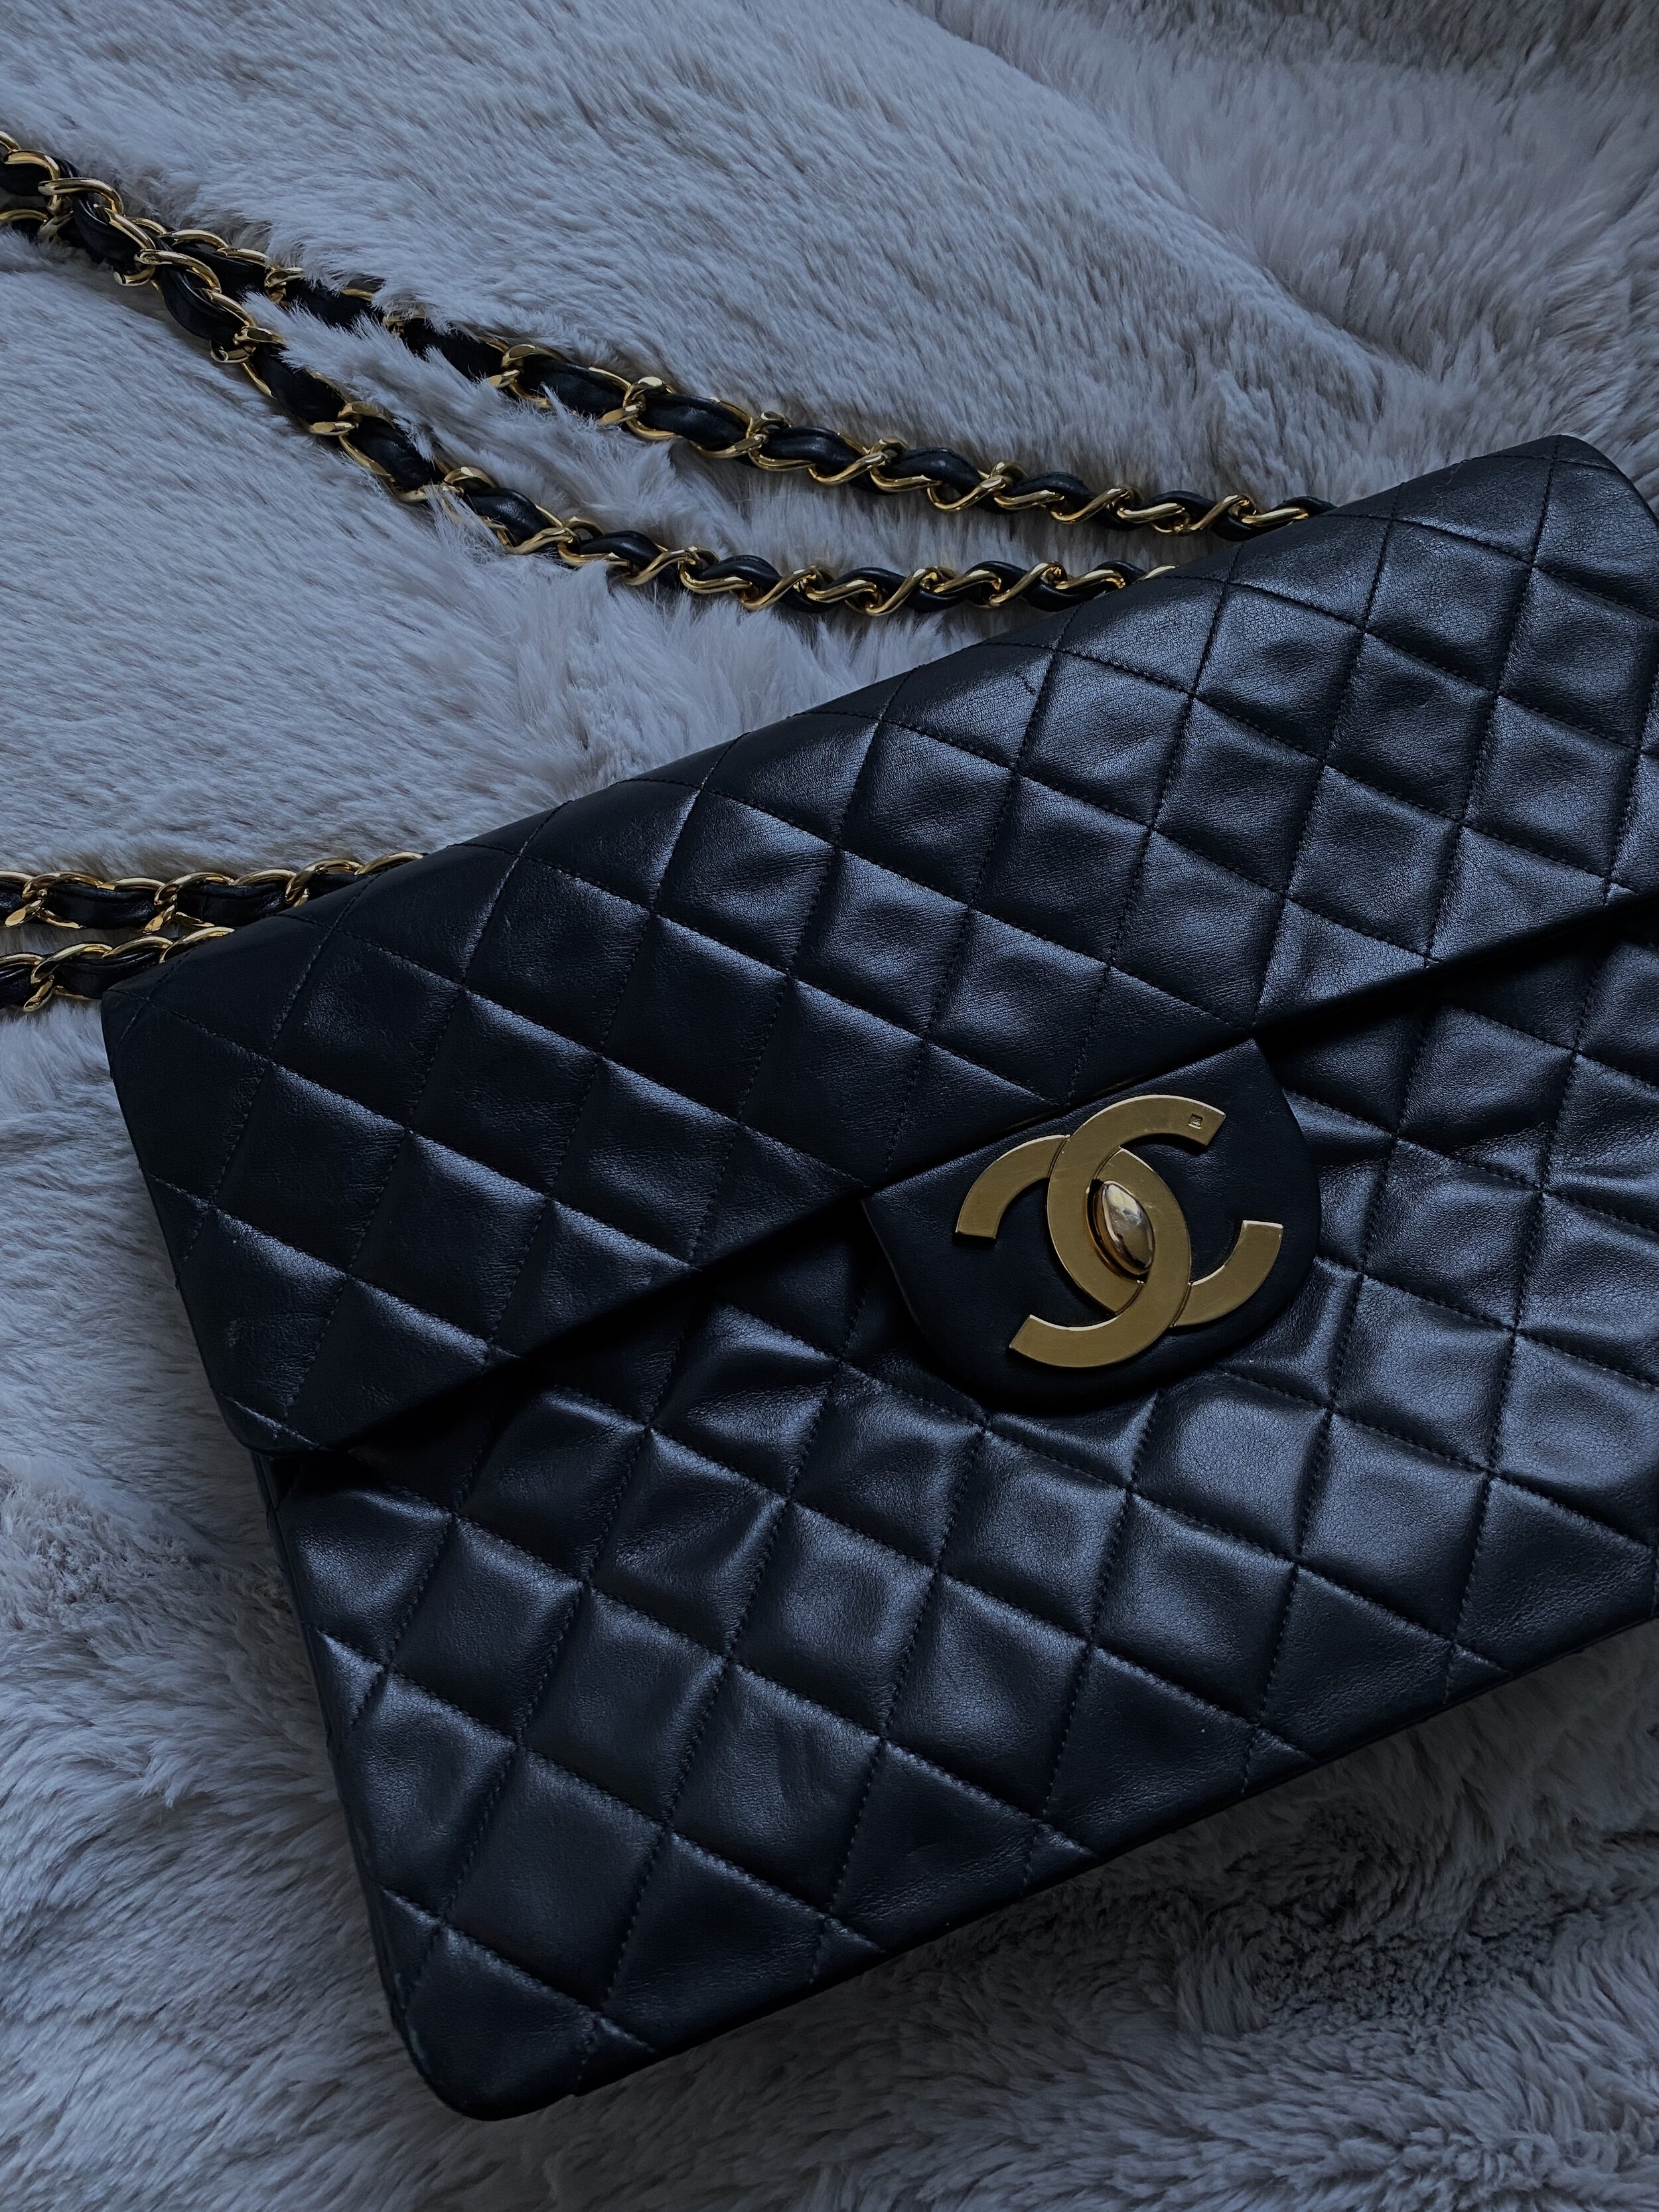 bags similar to chanel flap bag